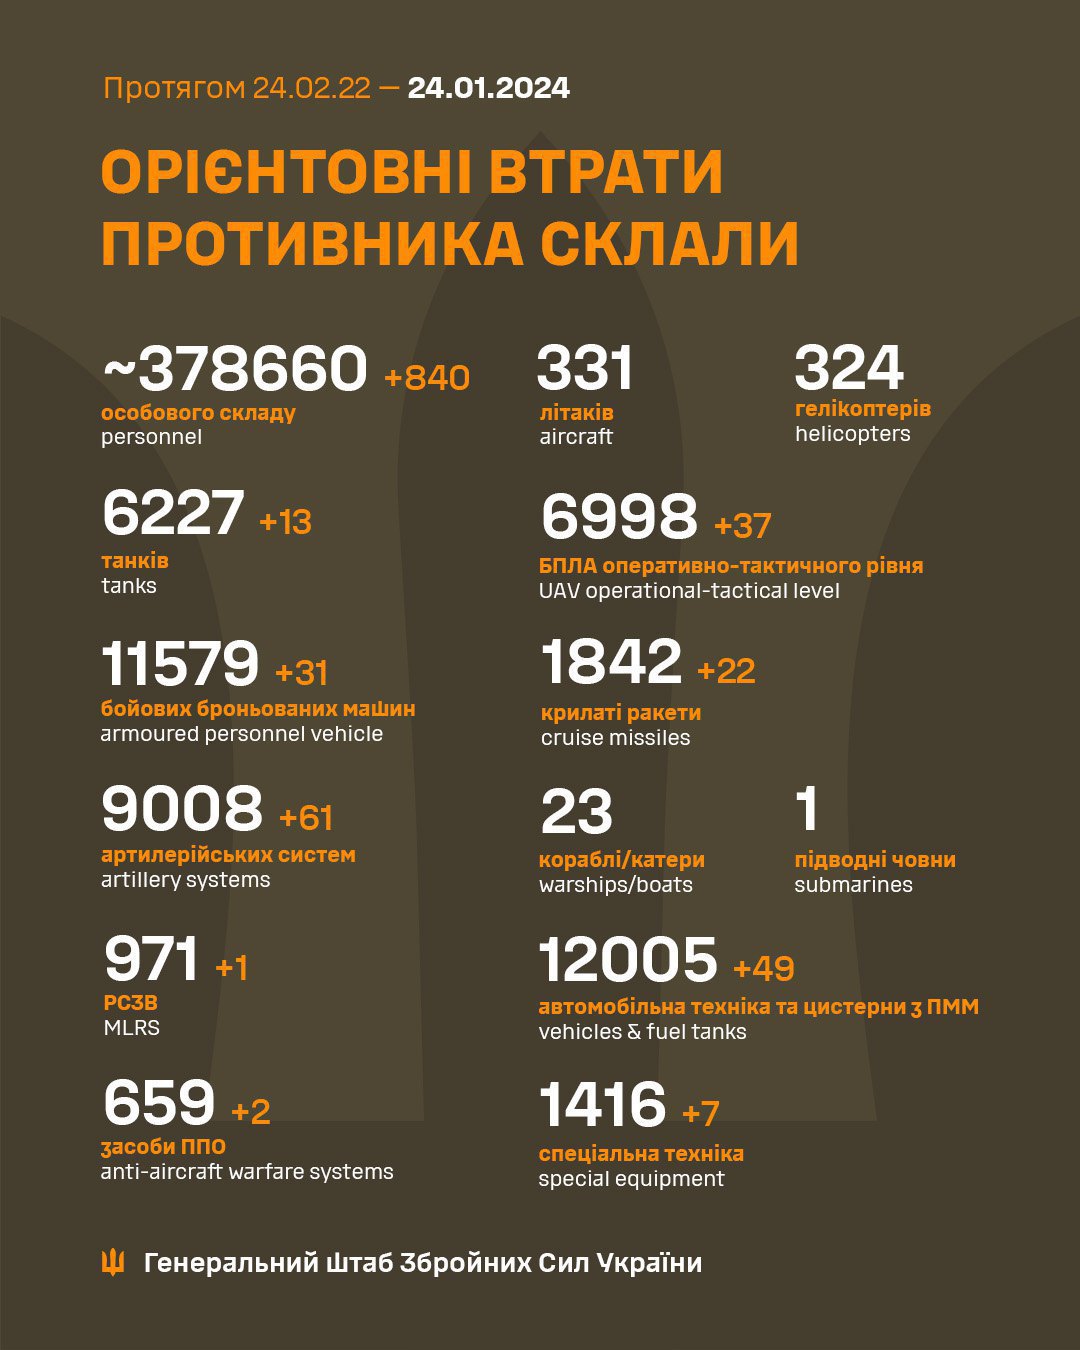 Russian losses as of 24.01.24